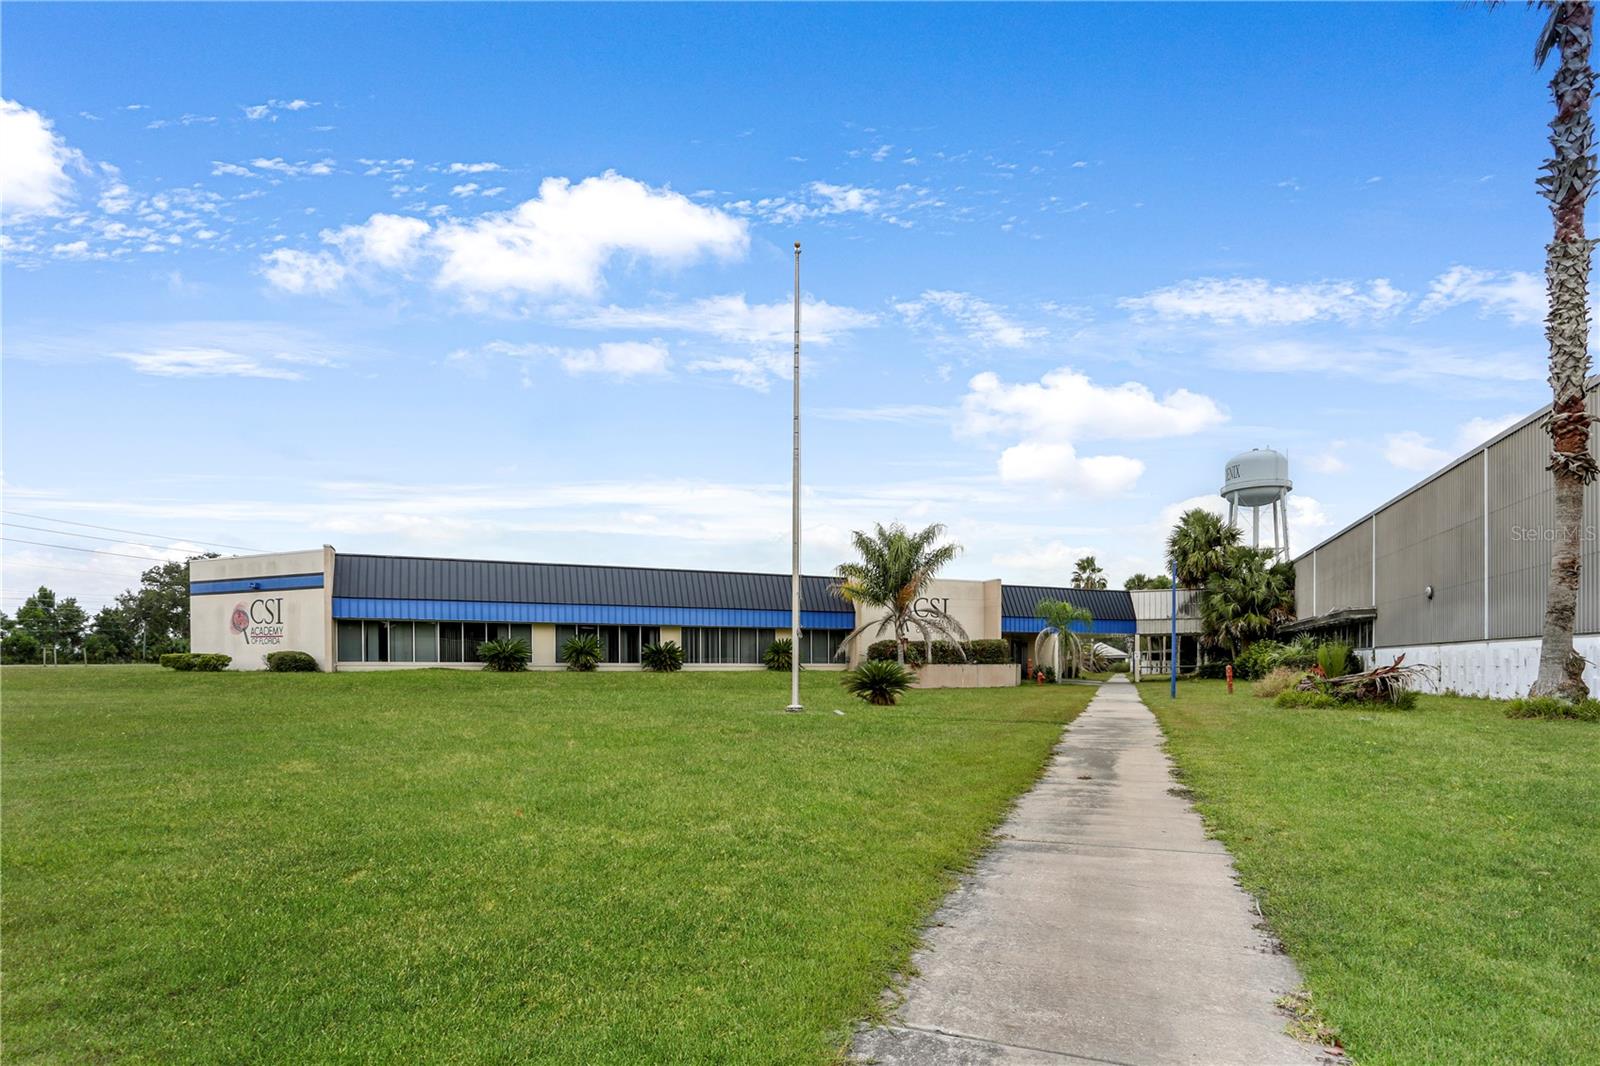 Corporate Building or Campus Building For Sale Near Gainesville, FL $3,300,000